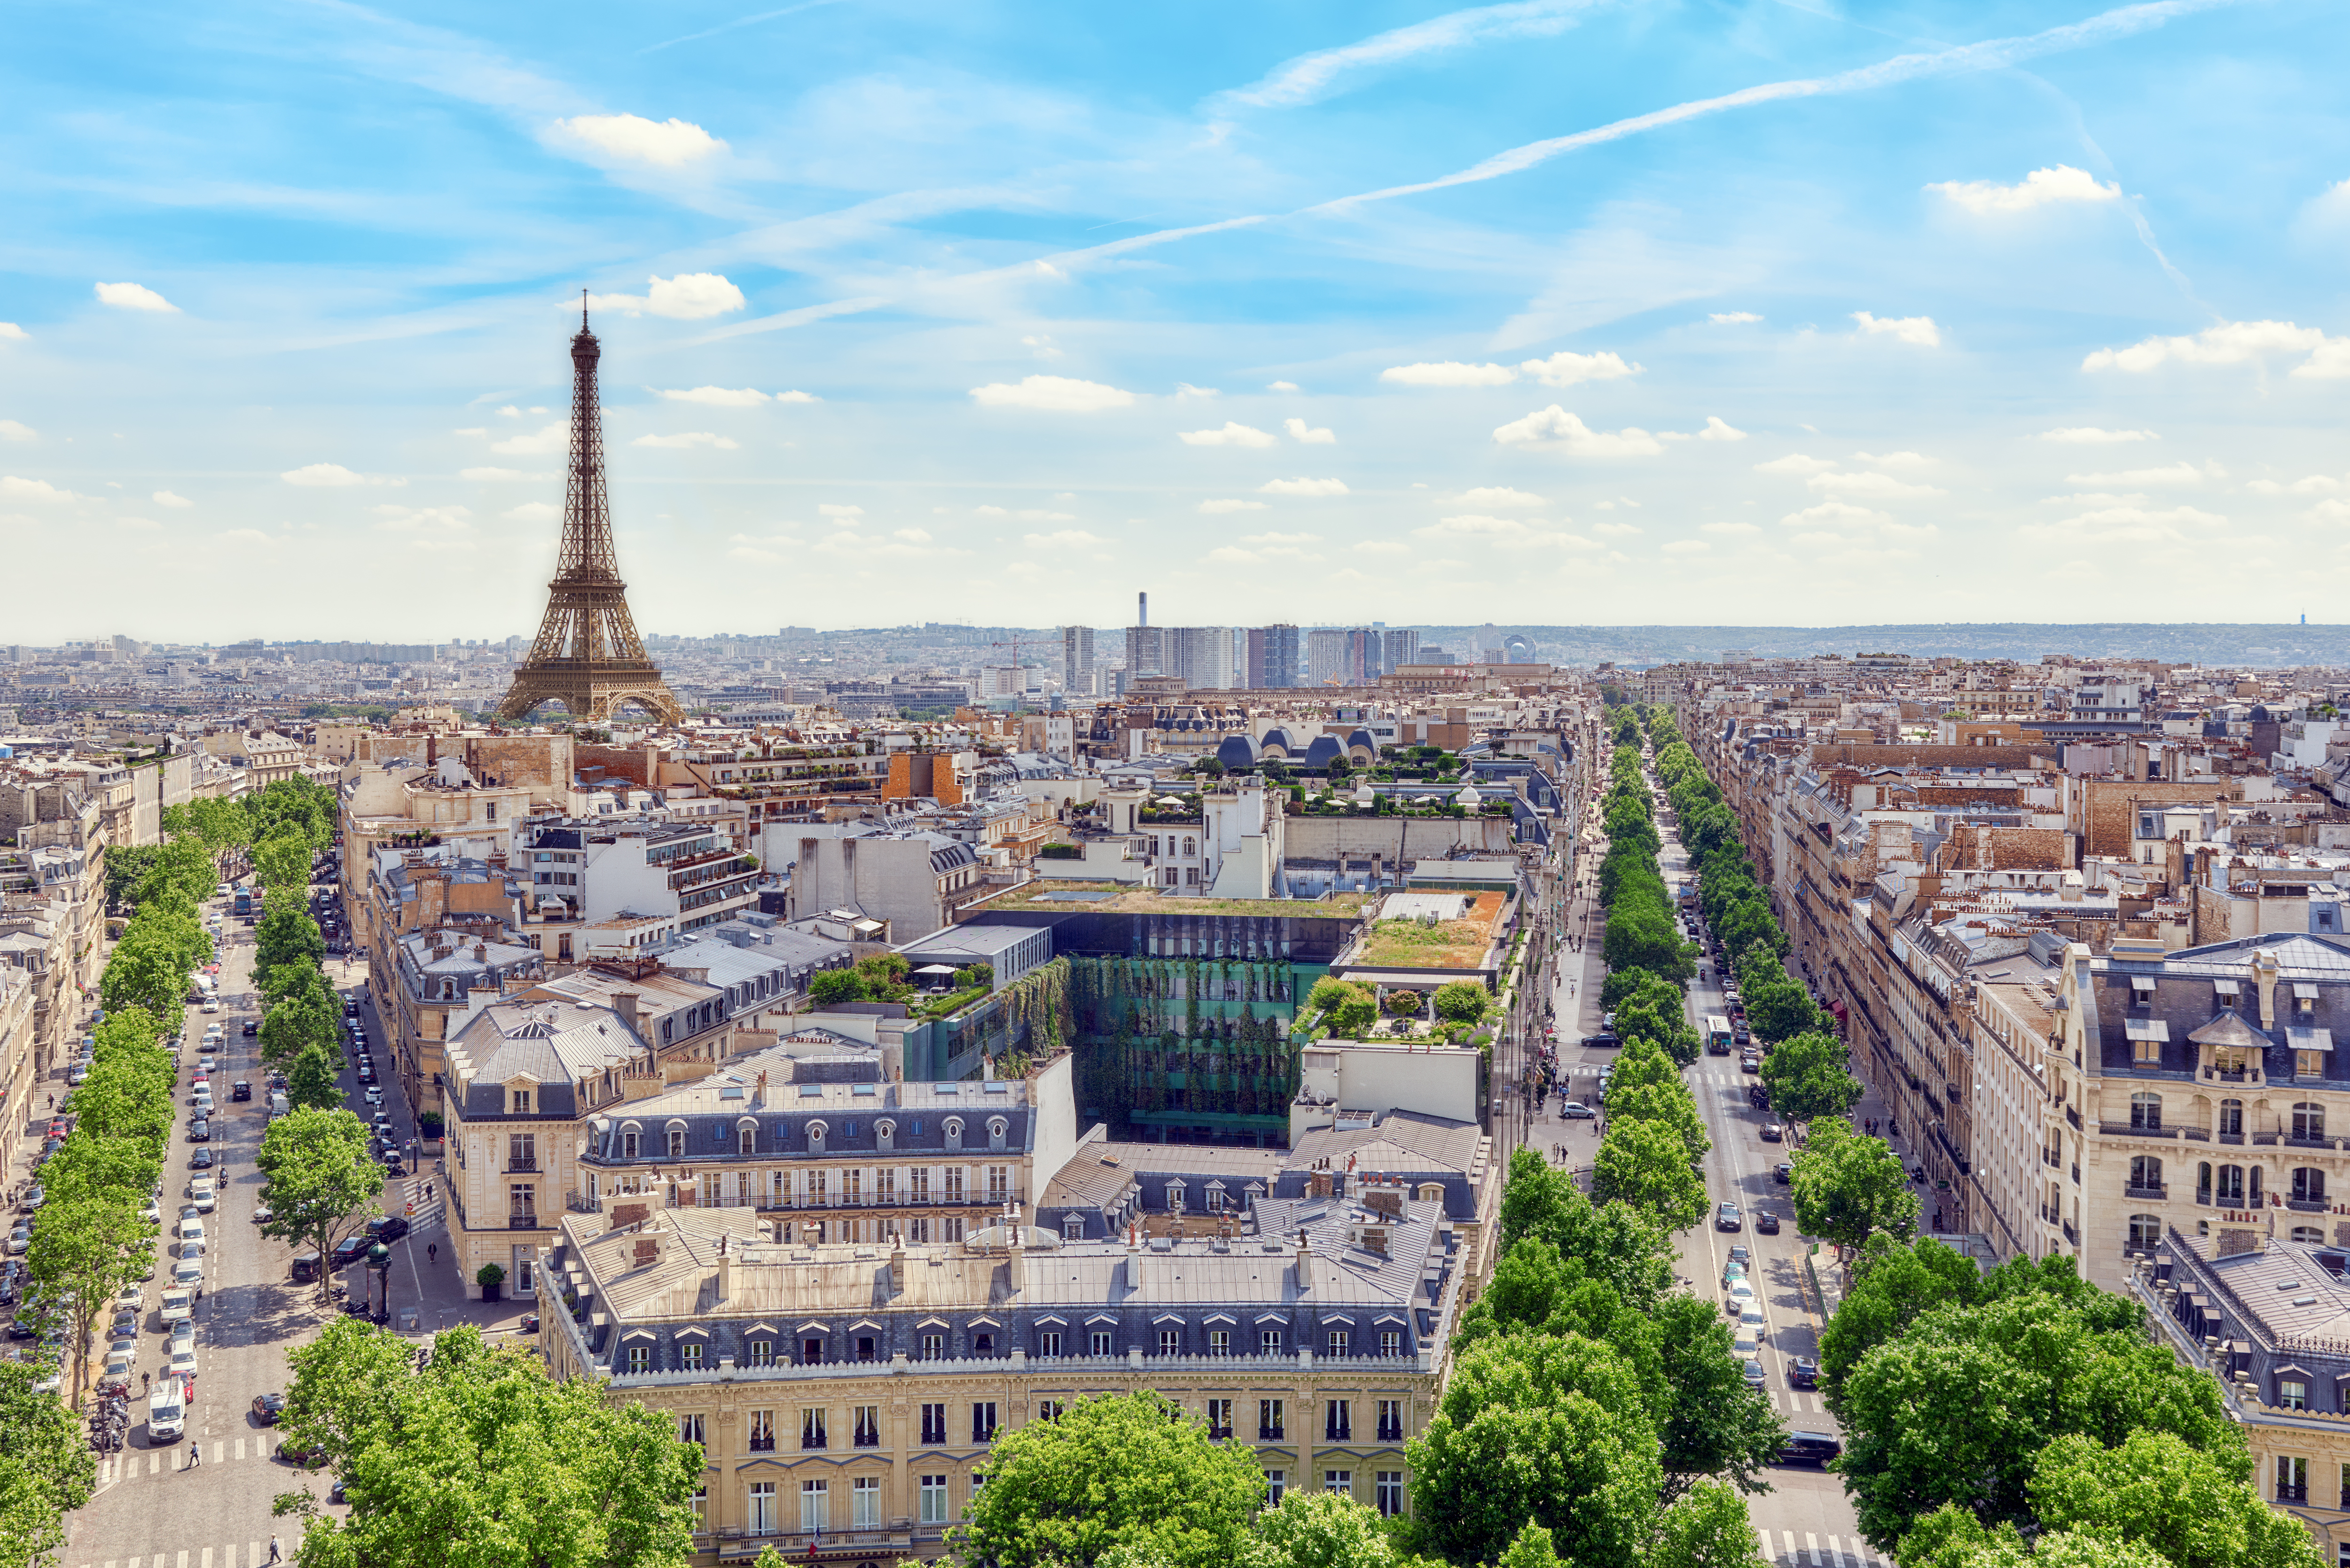 Ranked in 2017 as the "most elegant city in the world", the French capital is the architectural and cultural symbol of the country. To run in Paris is to live in the heart of this fashion capital filled with world-famous monuments, from the Eiffel Tower to the Arc de Triomphe.